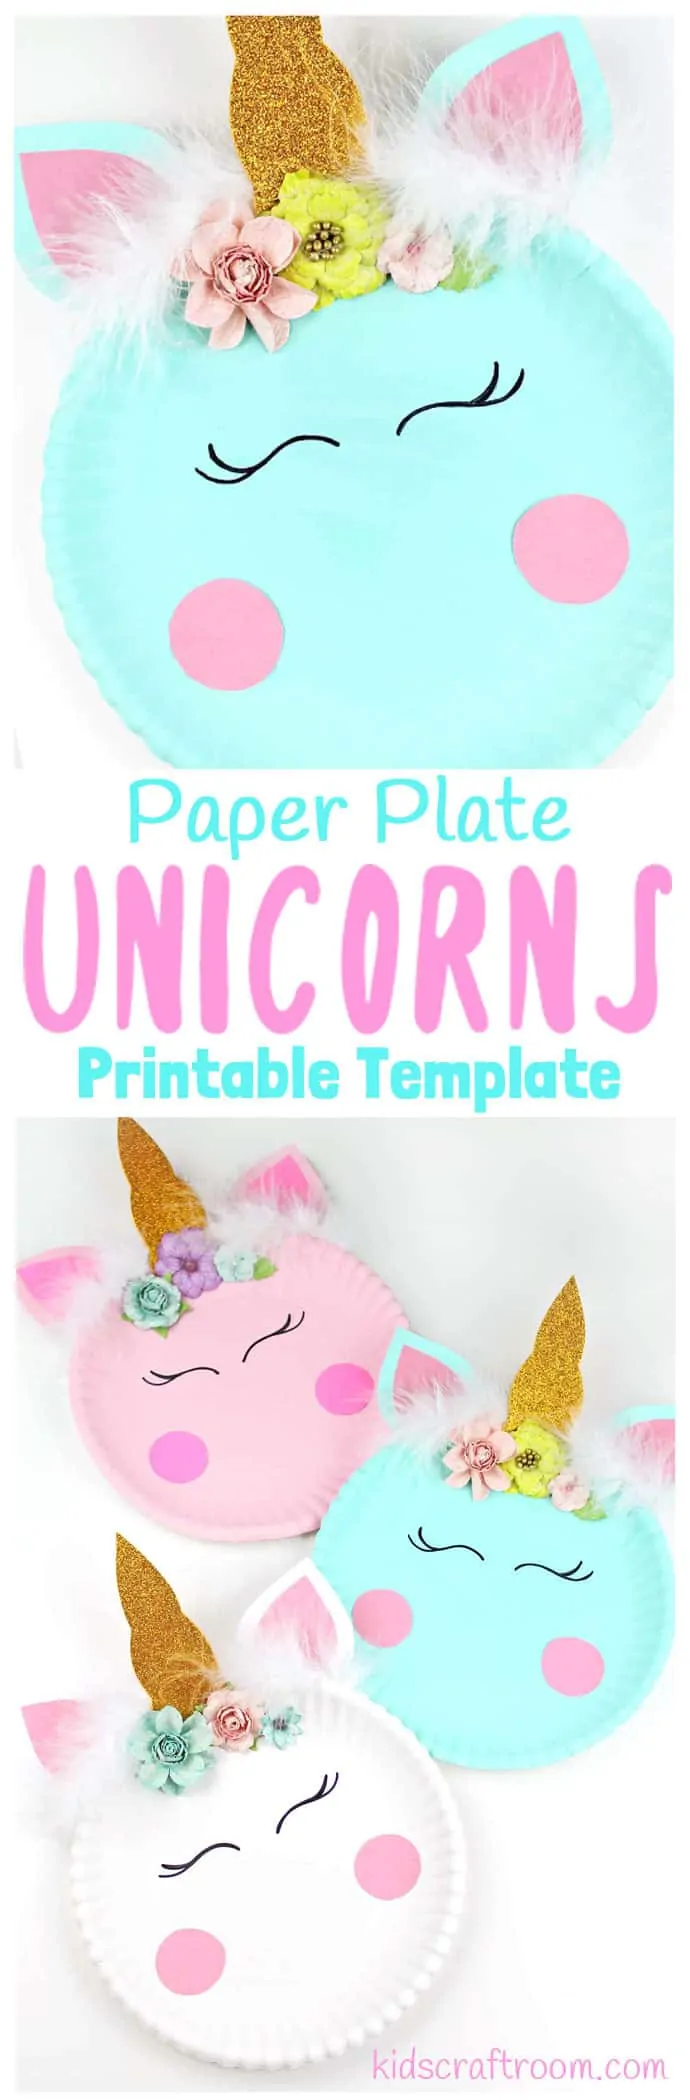 Have your kids been hit with the unicorn frenzy? We just love them! Bring some magic to your craft sessions with this super simple Paper Plate Unicorn Craft. These unicorns look so pretty your big kids will love them but they're simple enough for your preschoolers and toddlers to enjoy too. We've even got a free printable template to make it even easier! #unicorn #unicorns #unicorncrafts #paperplatecrafts #kidscrafts #craftsforkids #kidscraftroom #printable #crafts